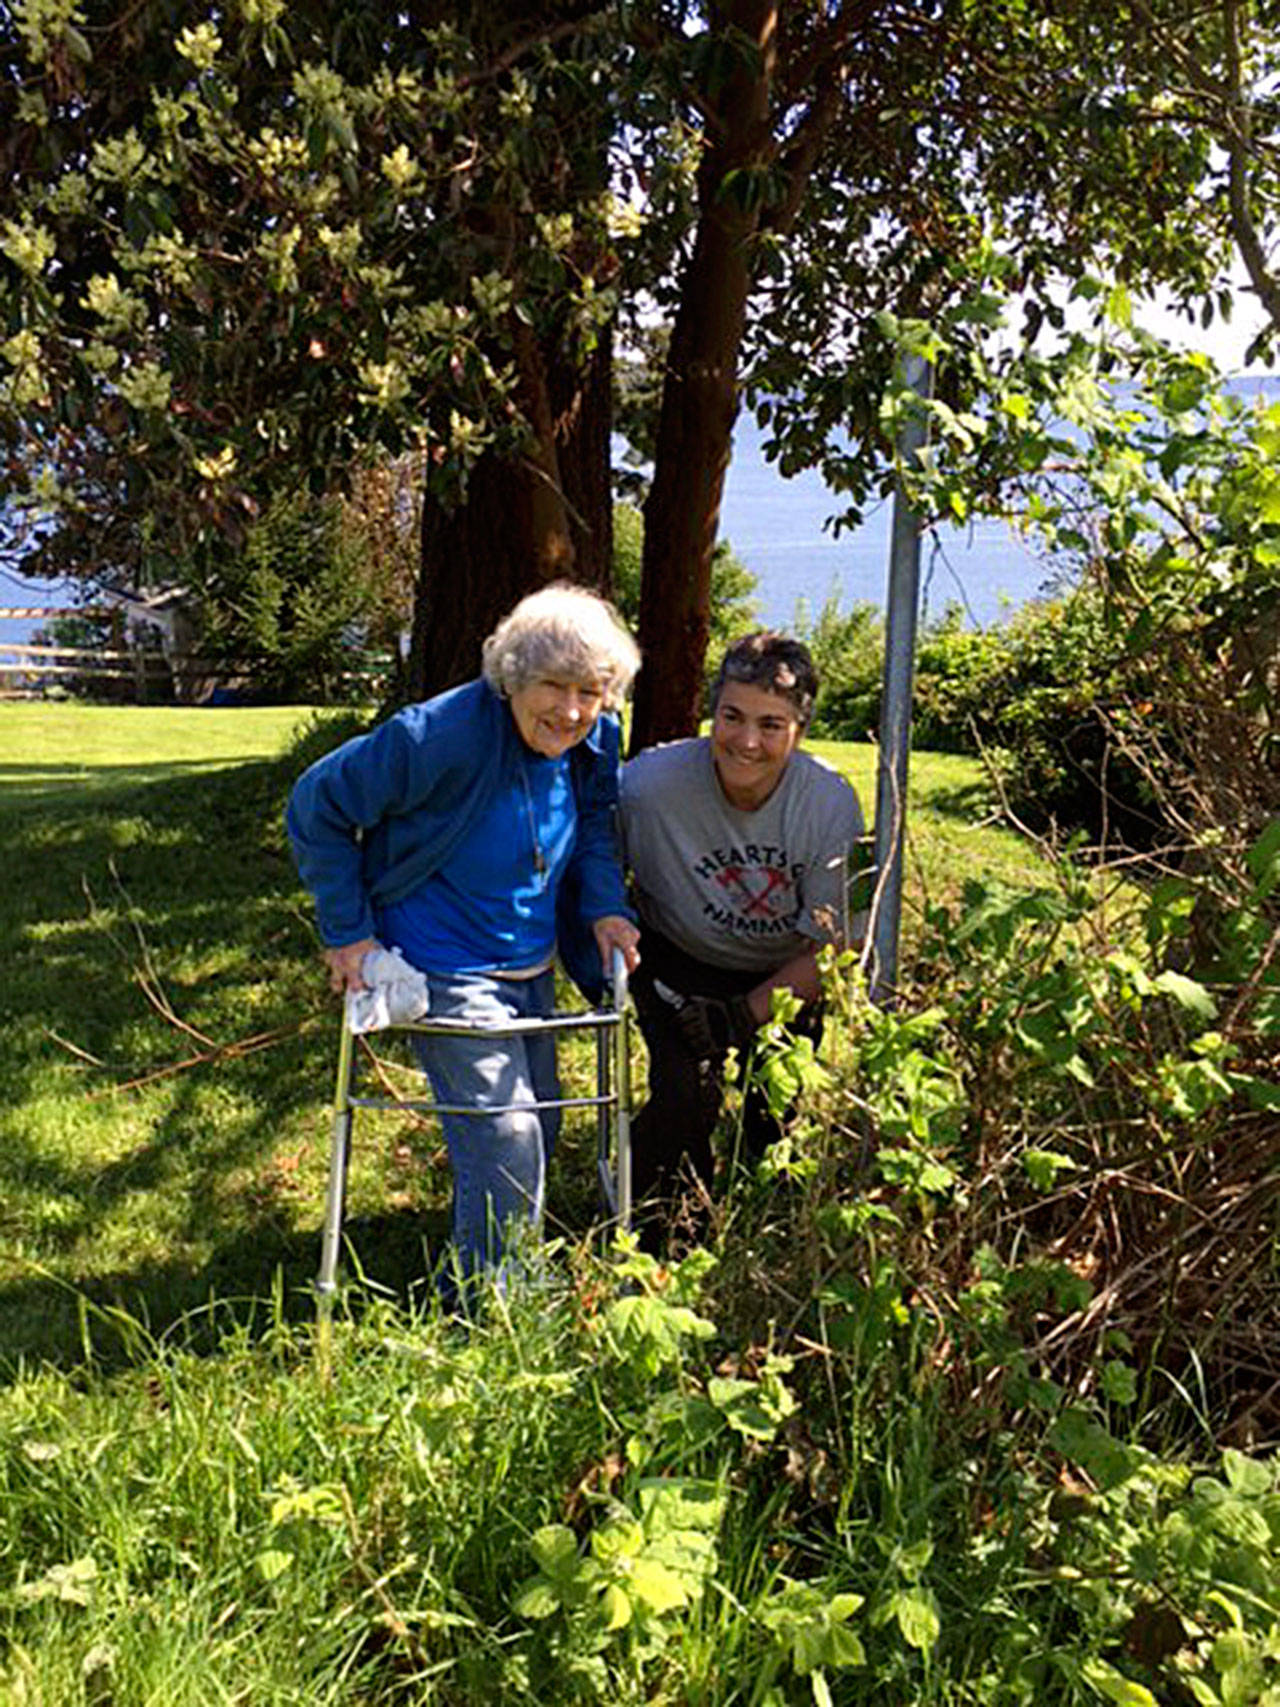 Last year, Cris Sanguin (right) led a team of Central Whidbey Hearts & Hammers volunteers to provide loving lawn care for Florence Harves, who was thrilled with the results. Photo provided